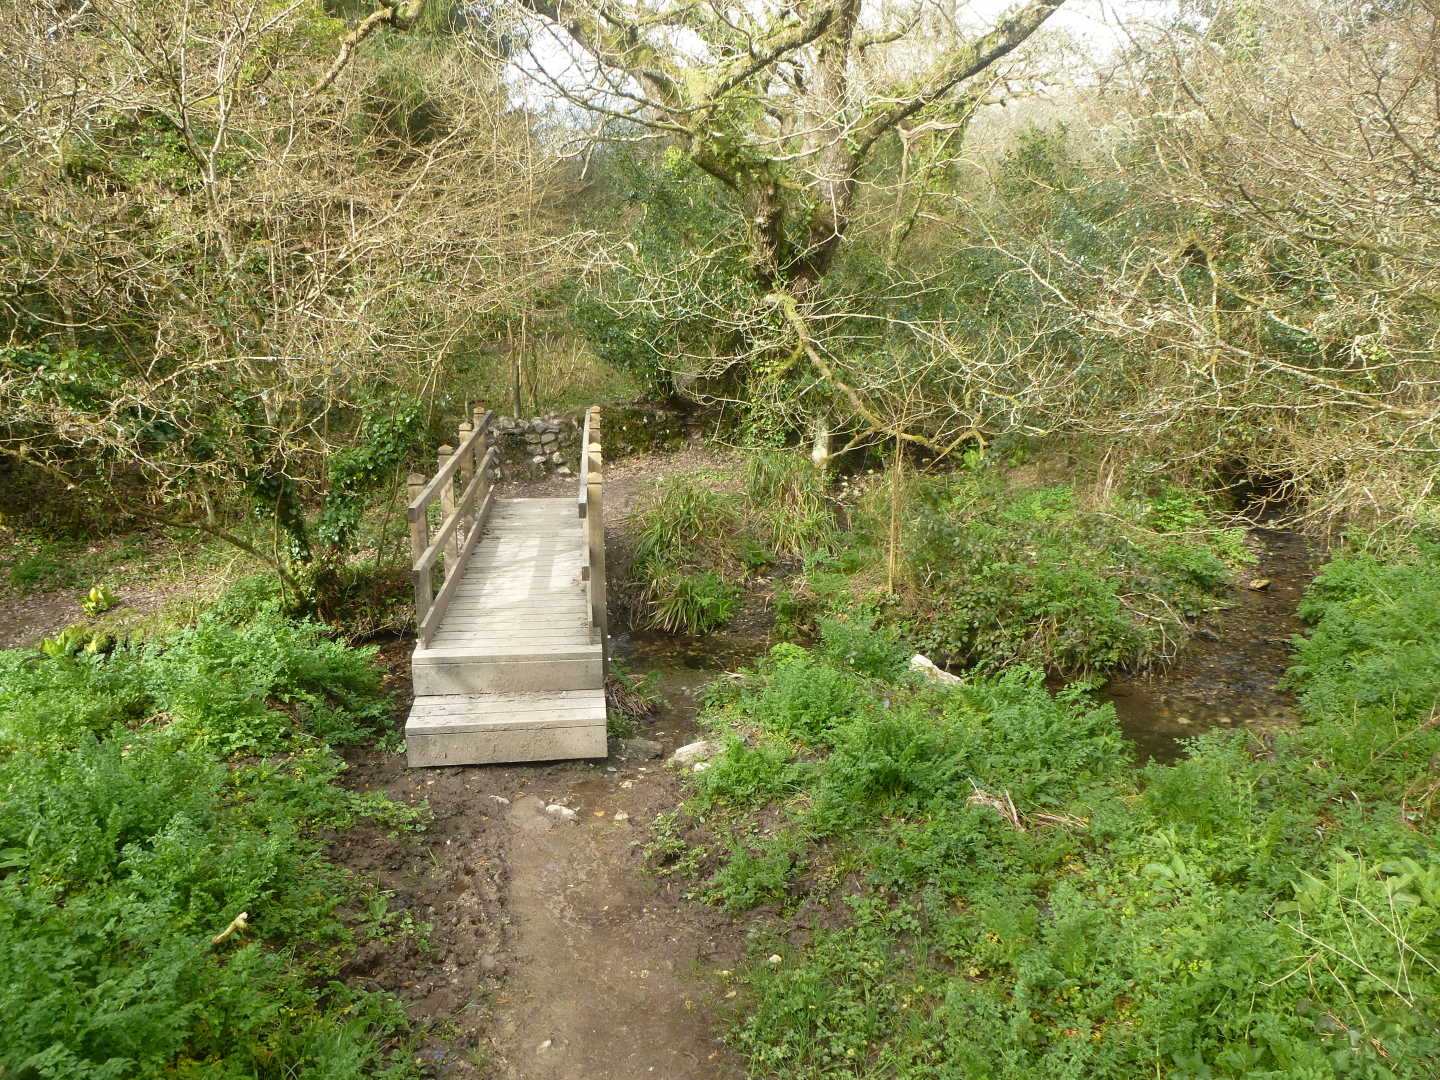 A small wooden footbrigdge over a stream